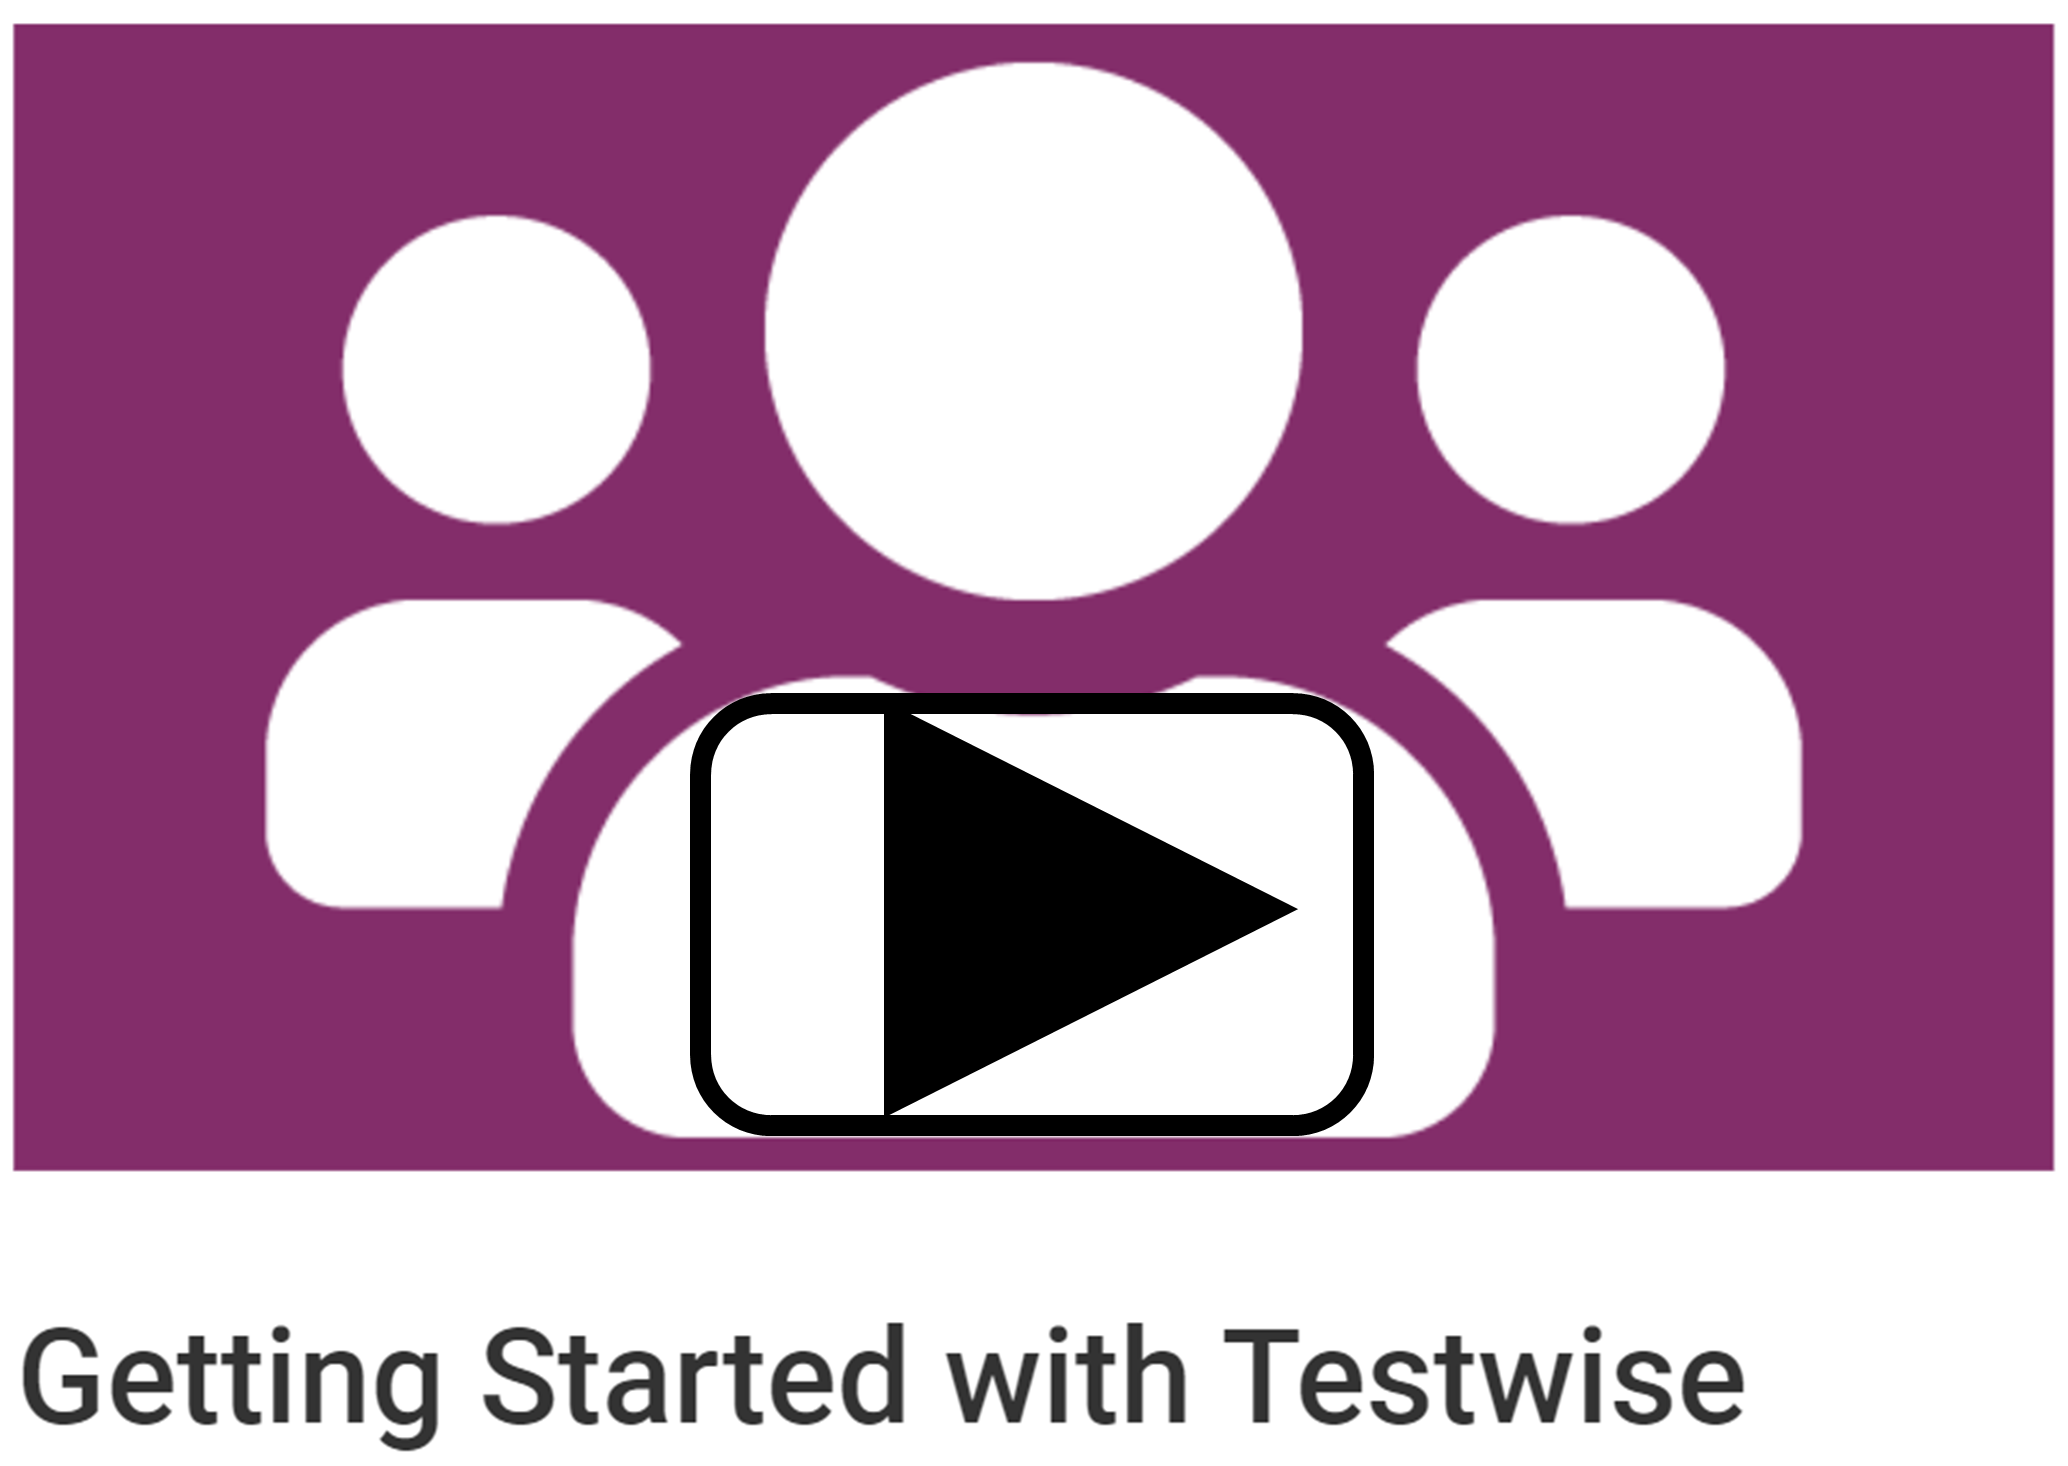 Screenshot from Getting Started with Testwise presentation